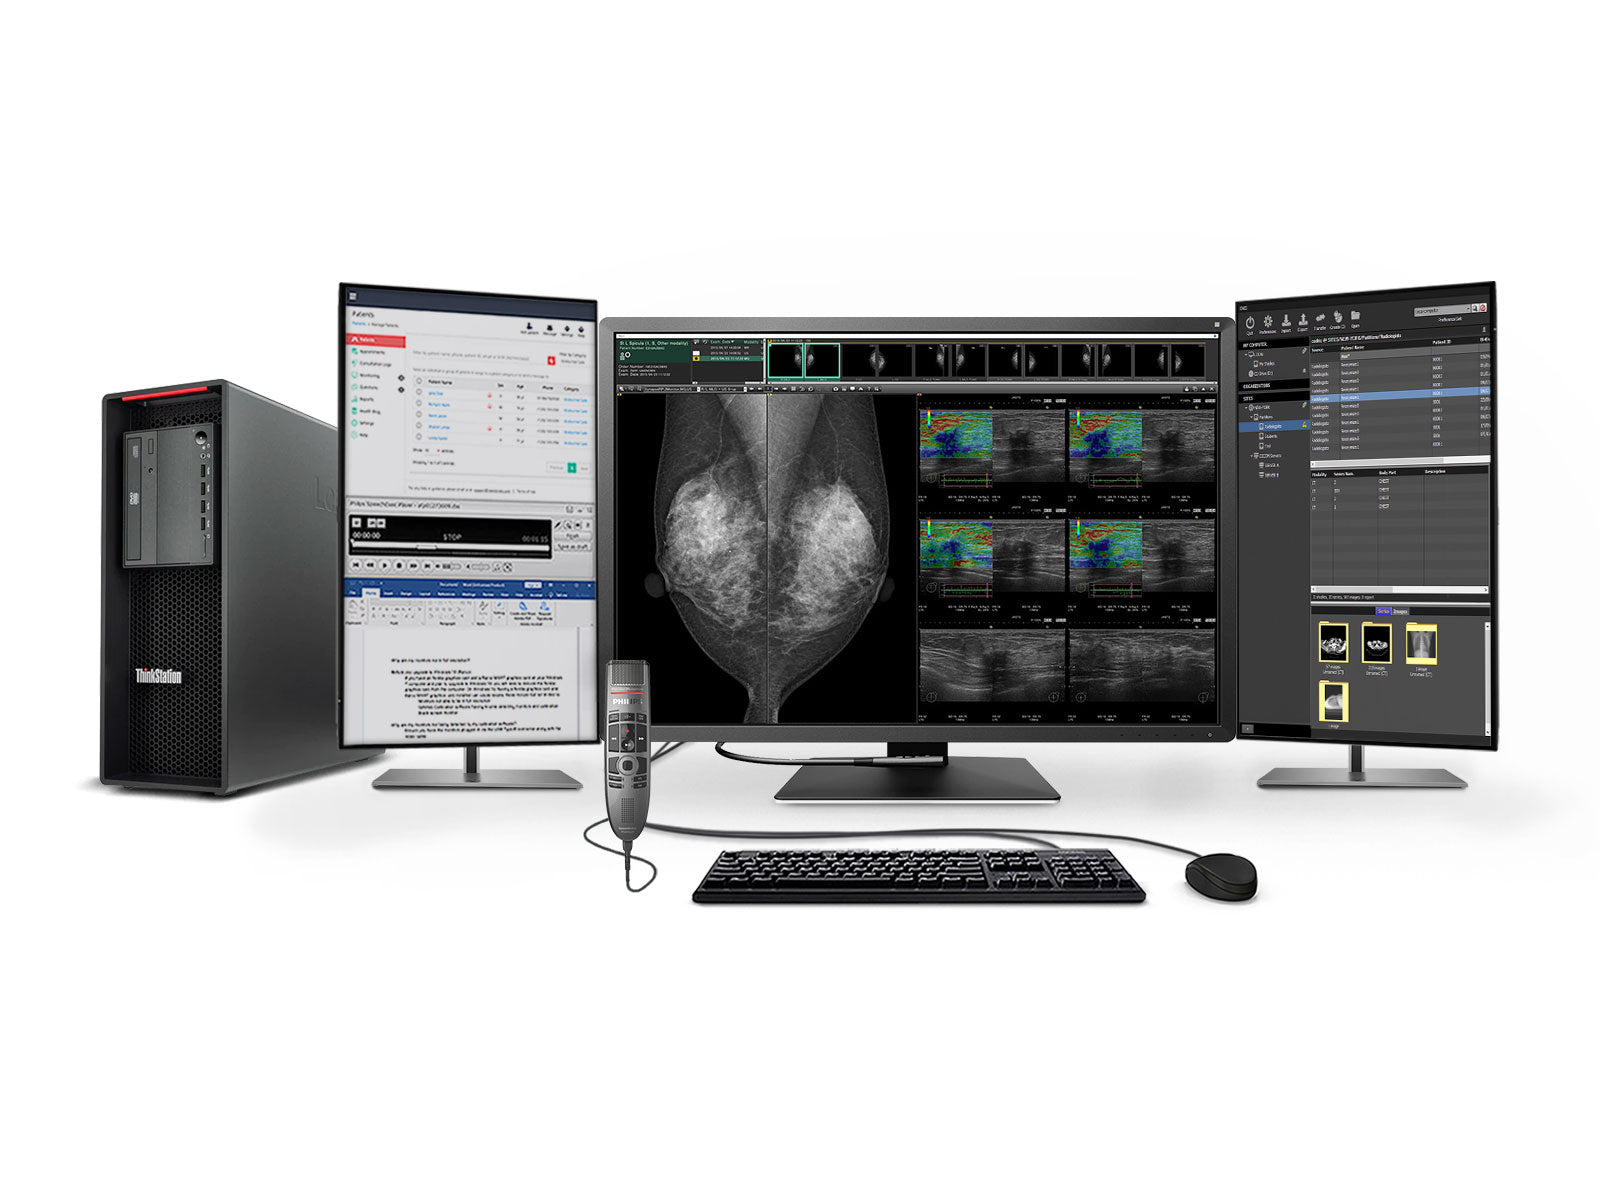 Complete Mammography Reading Station | Eizo 12MP Color Display | Lenovo Workstation | Dictation Mic | Worklist Monitors (RX1270P520)